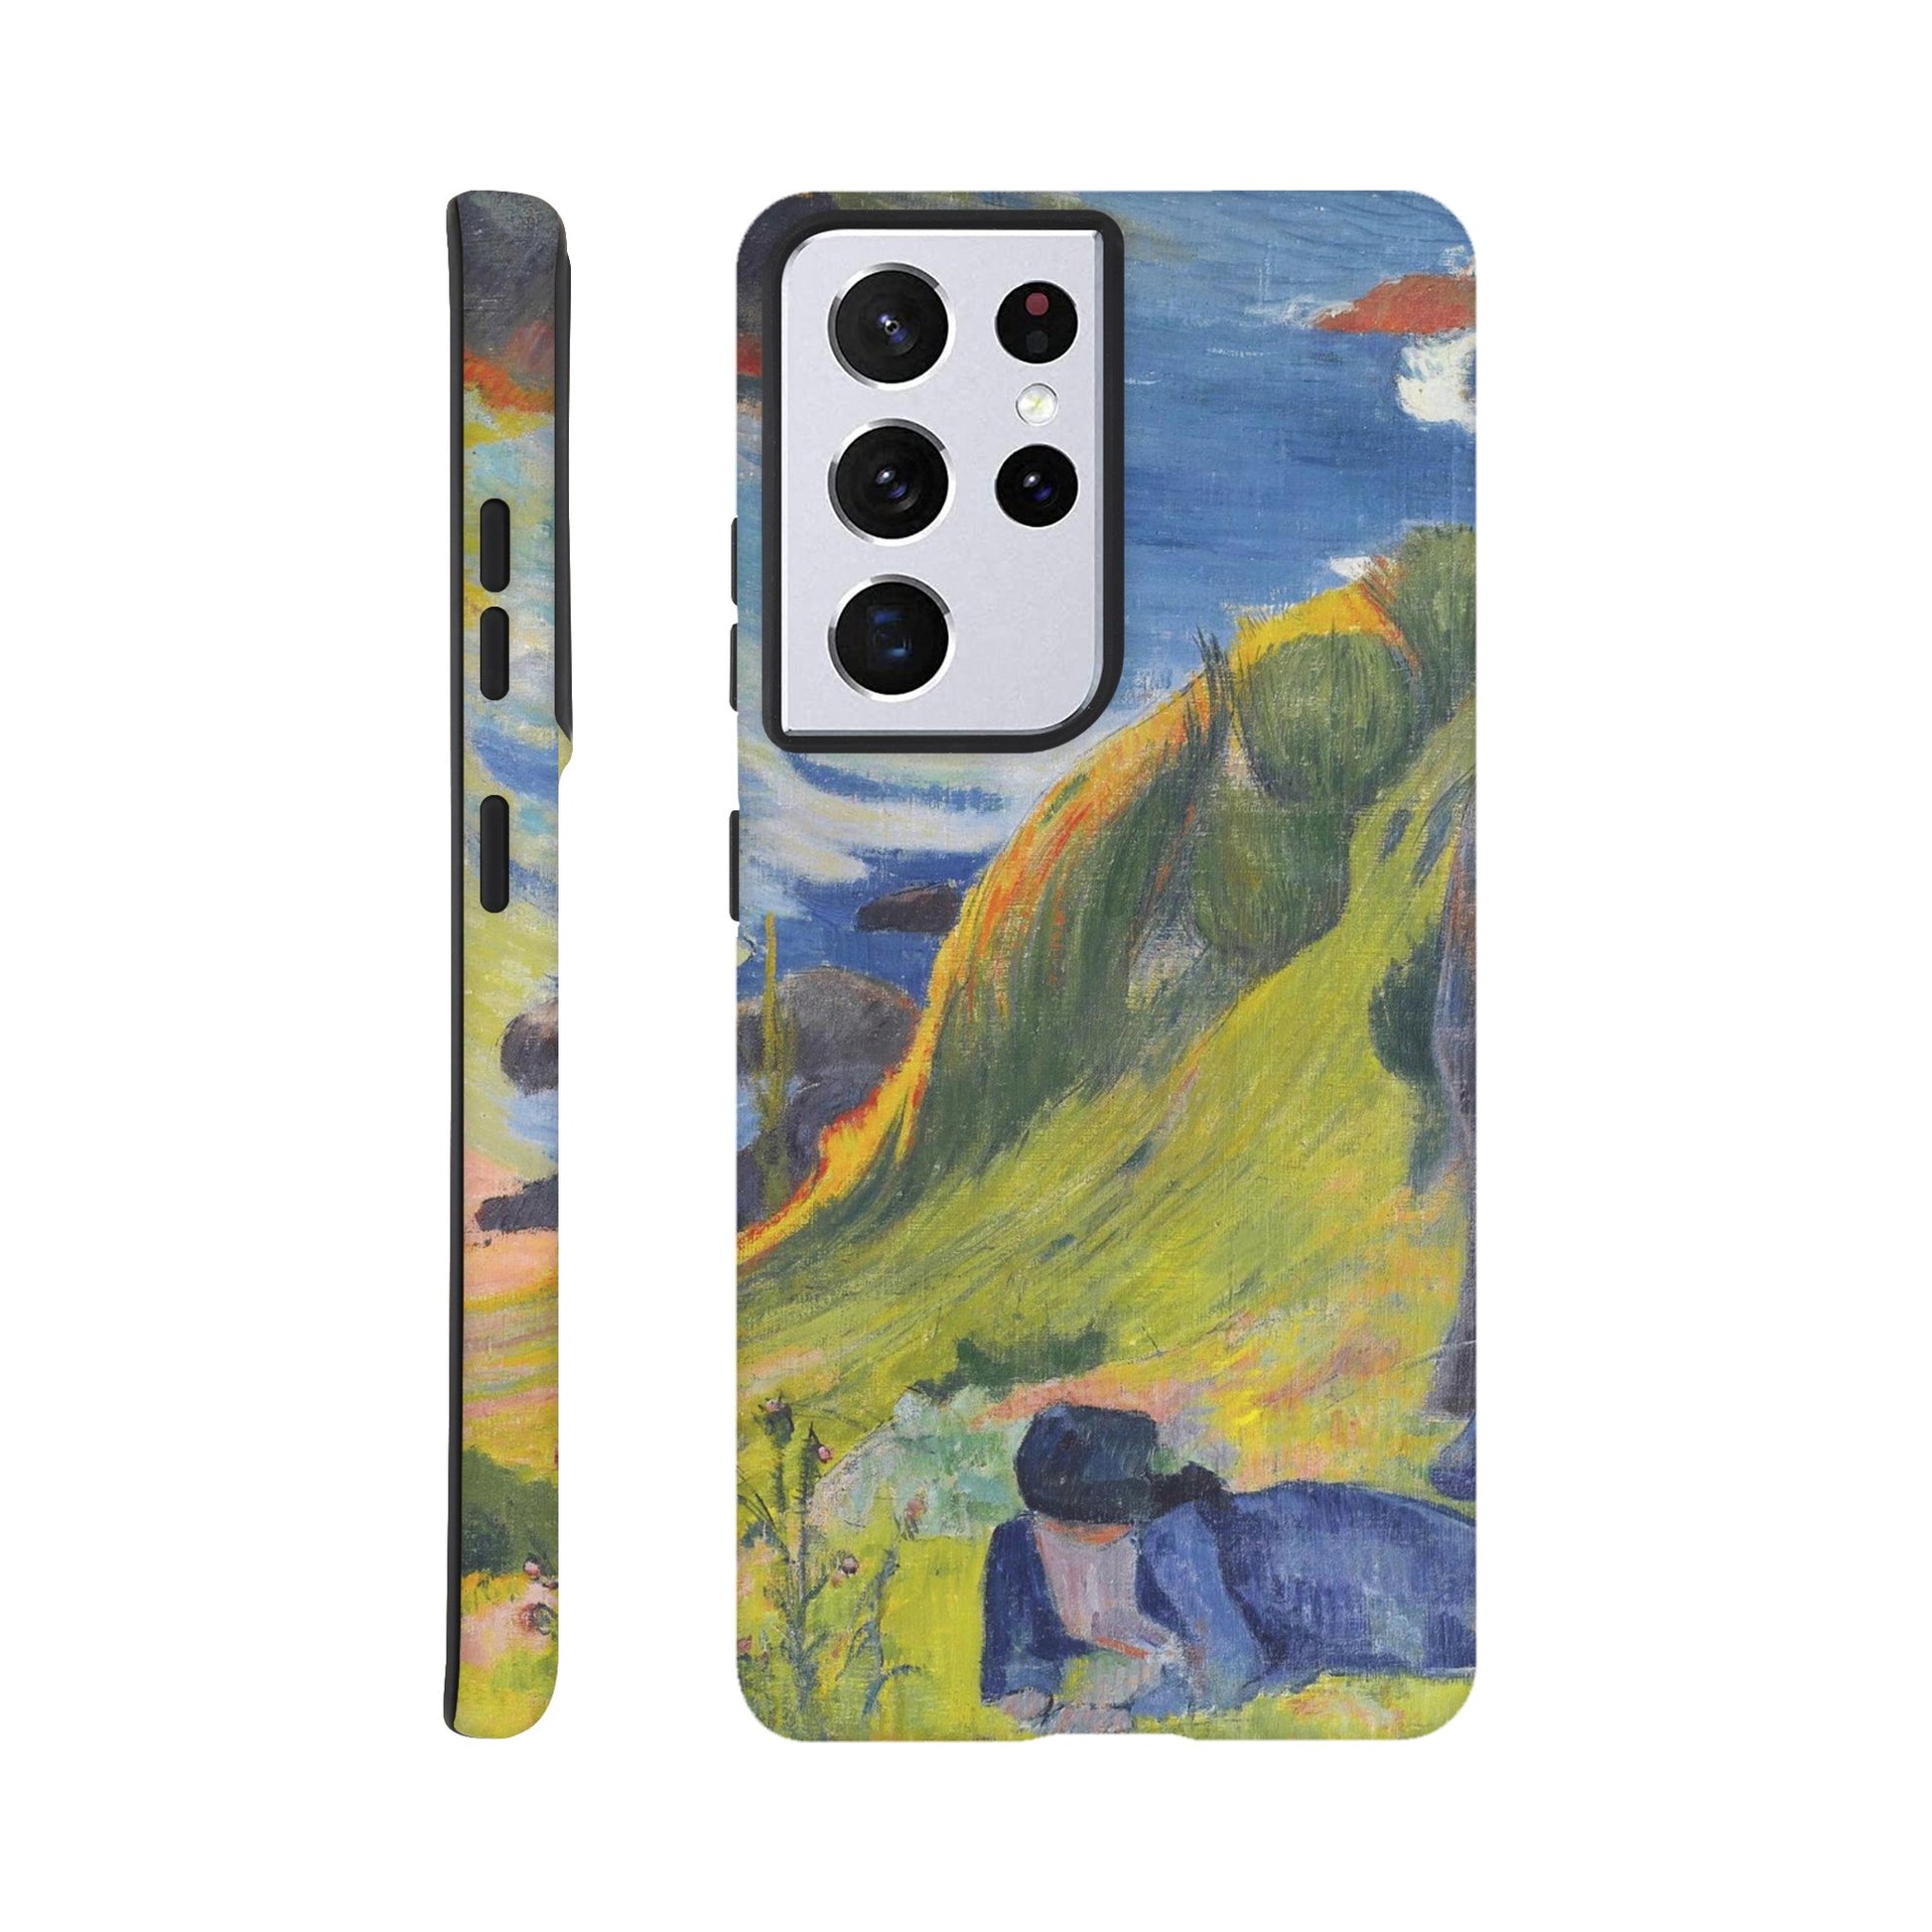 a phone case with a painting of a man and a dog